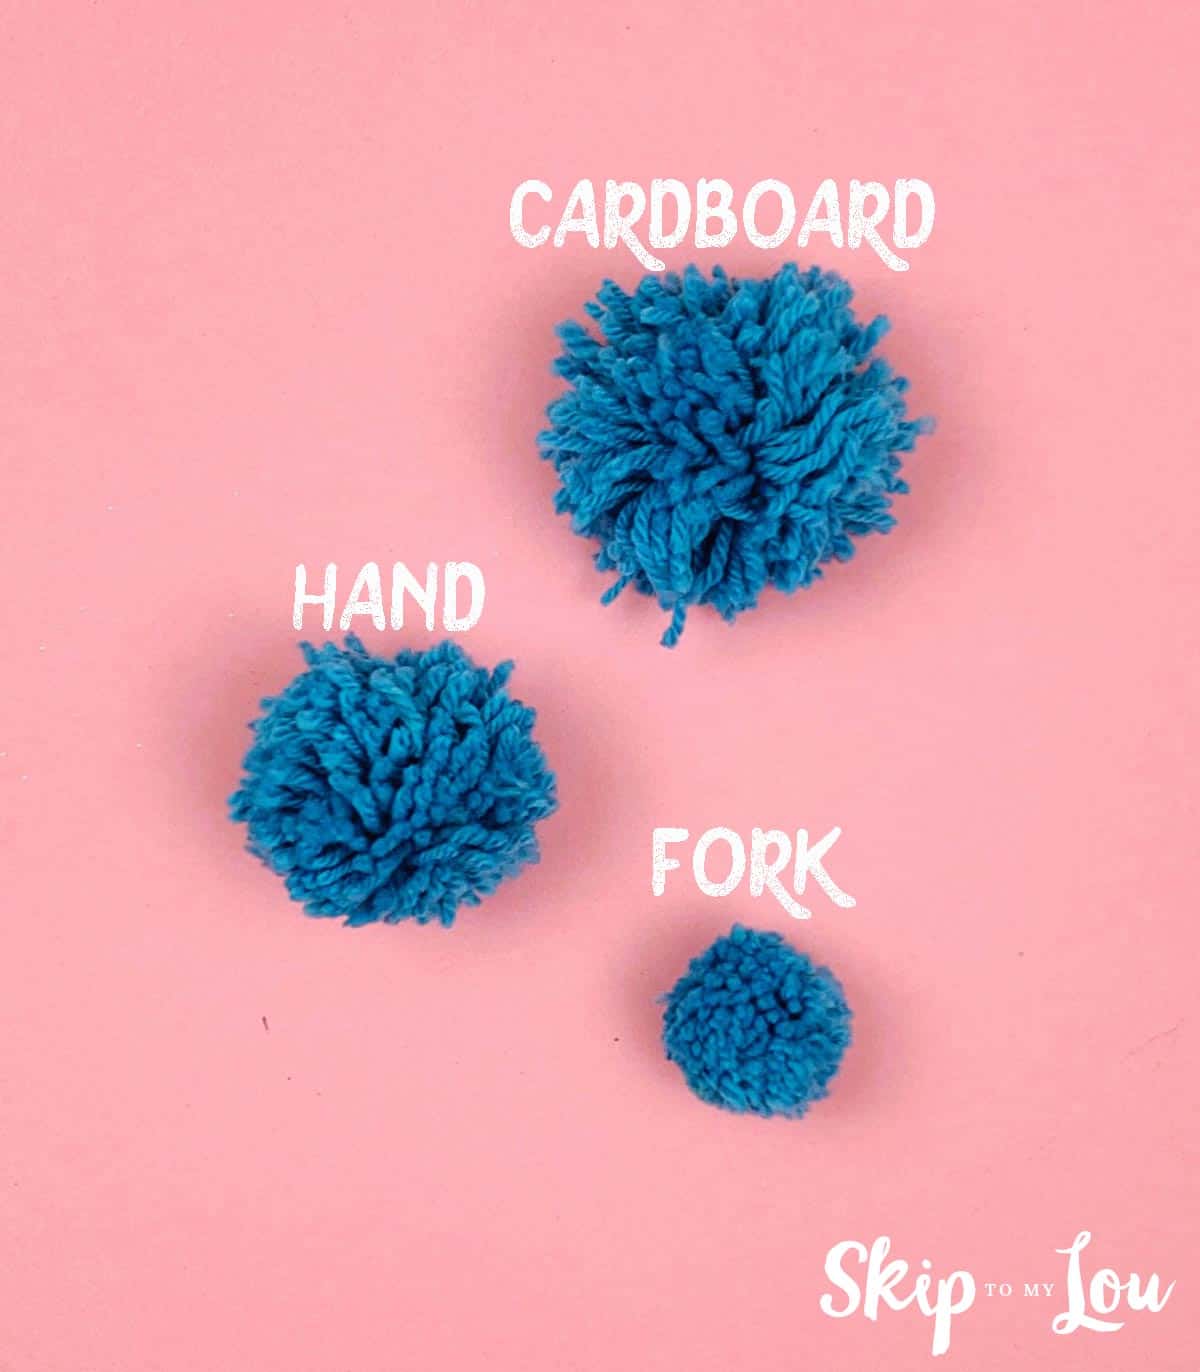 Three pom poms in different sizes made with blue yarn with text that reads "cardboard", "hand" and "fork"